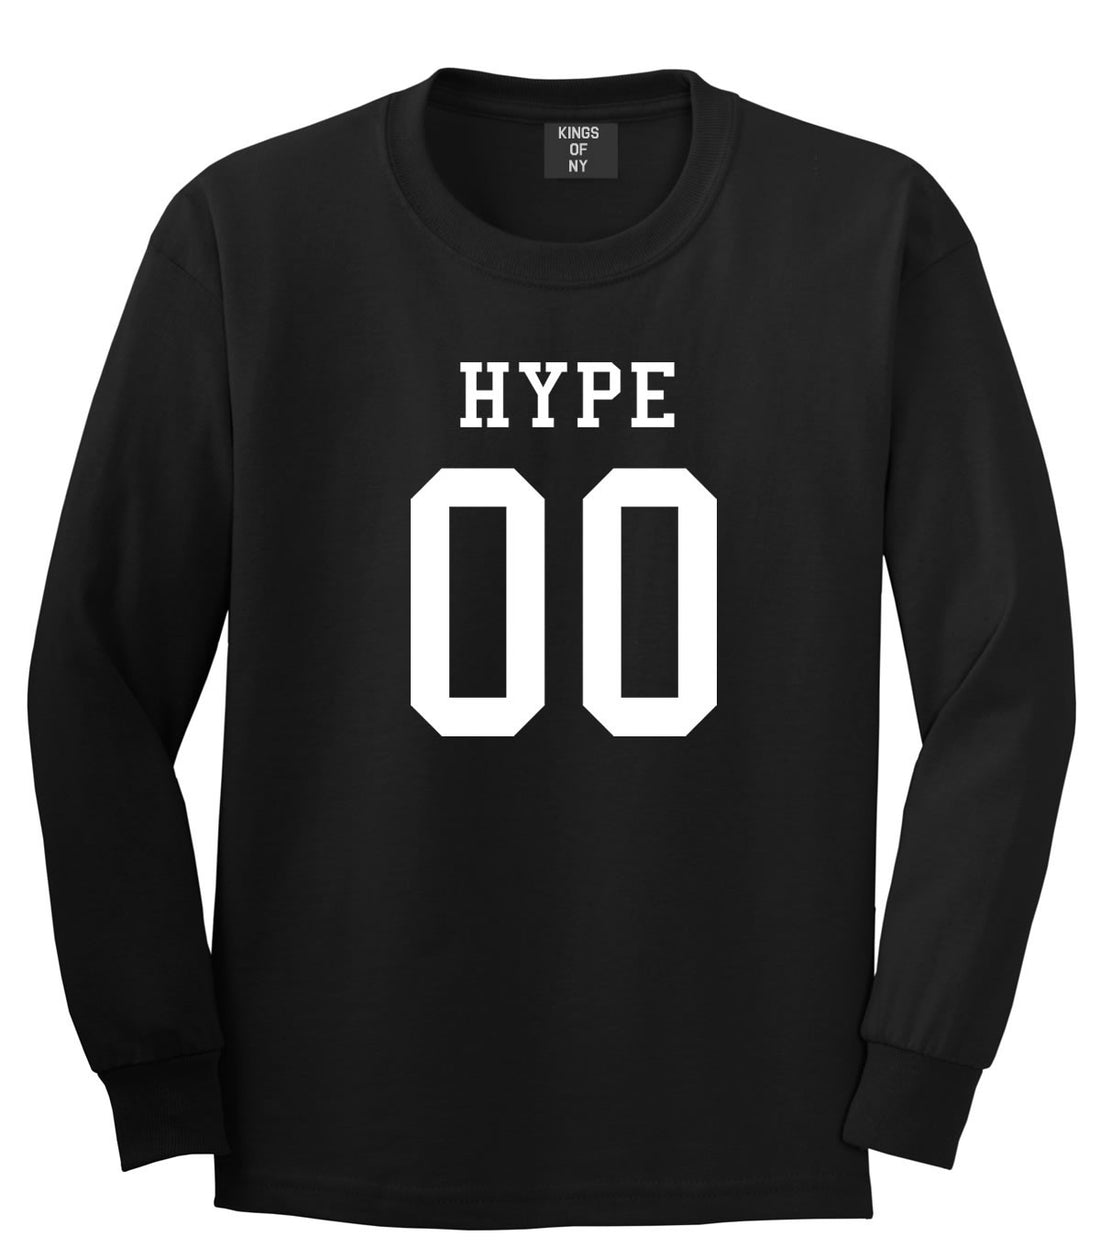 Hype Team Jersey Long Sleeve T-Shirt in Black By Kings Of NY